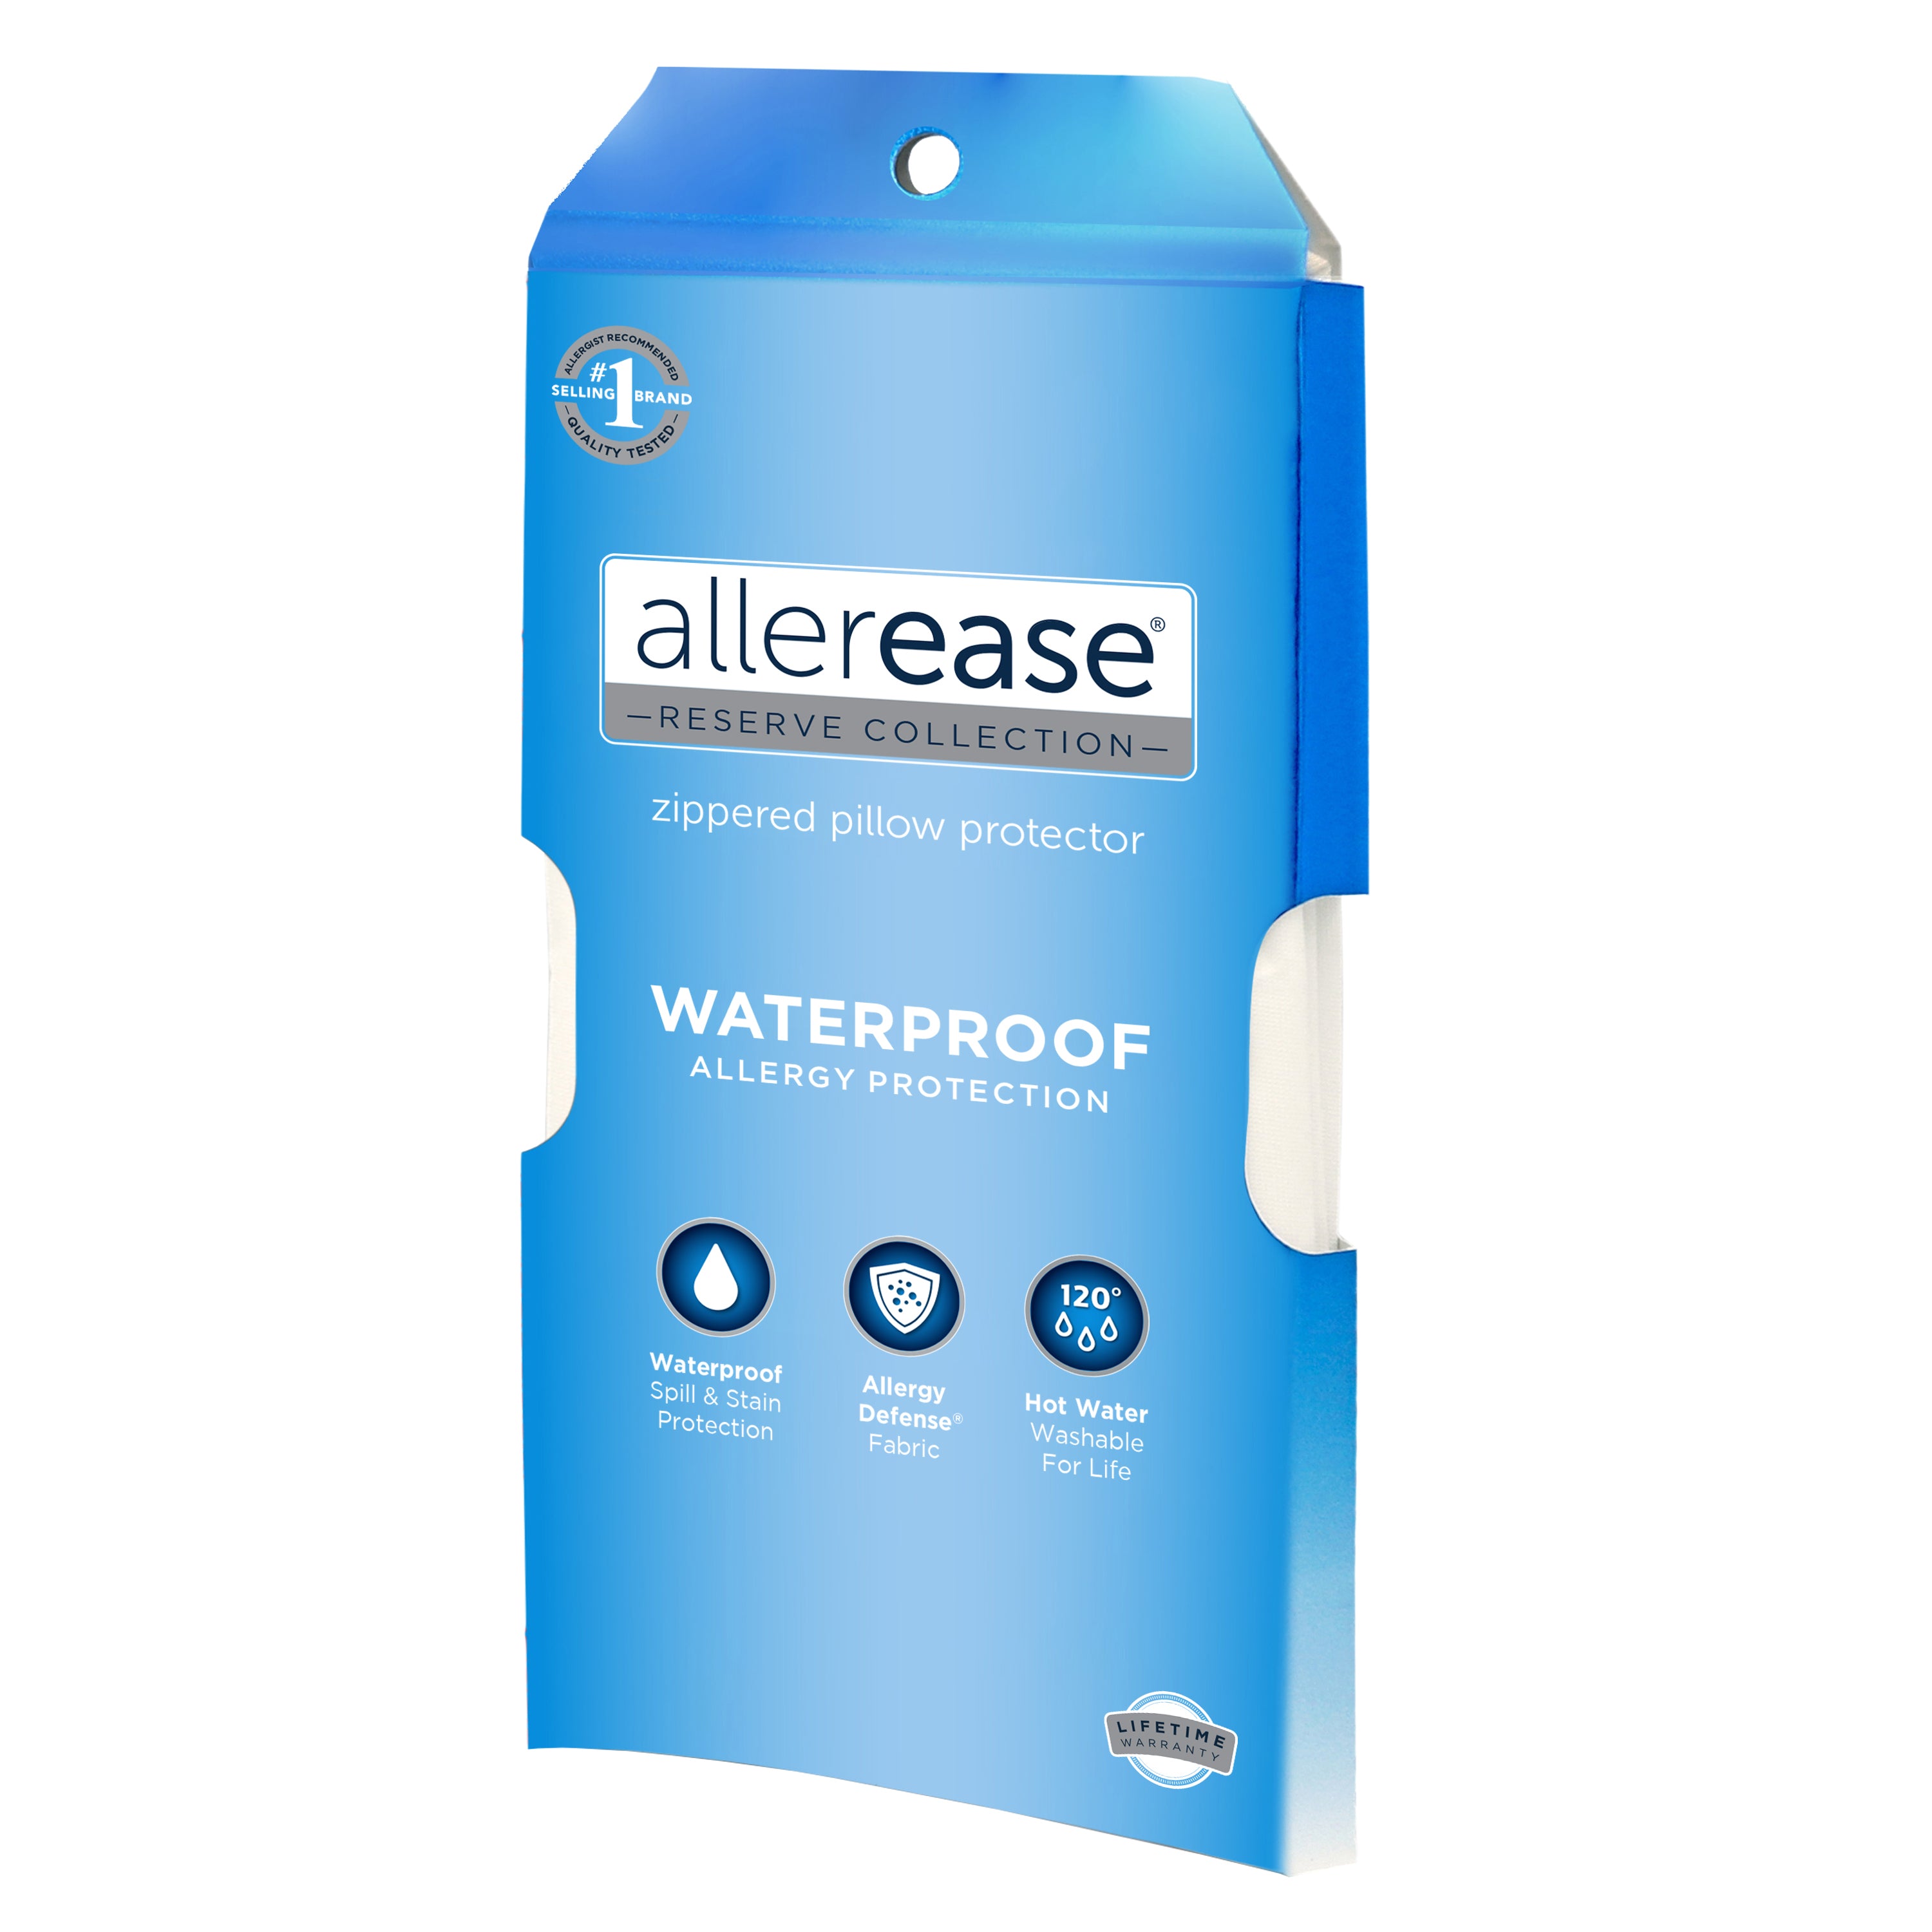 Allerease Waterproof Allergy Protection Mattress Protector, White, Twin